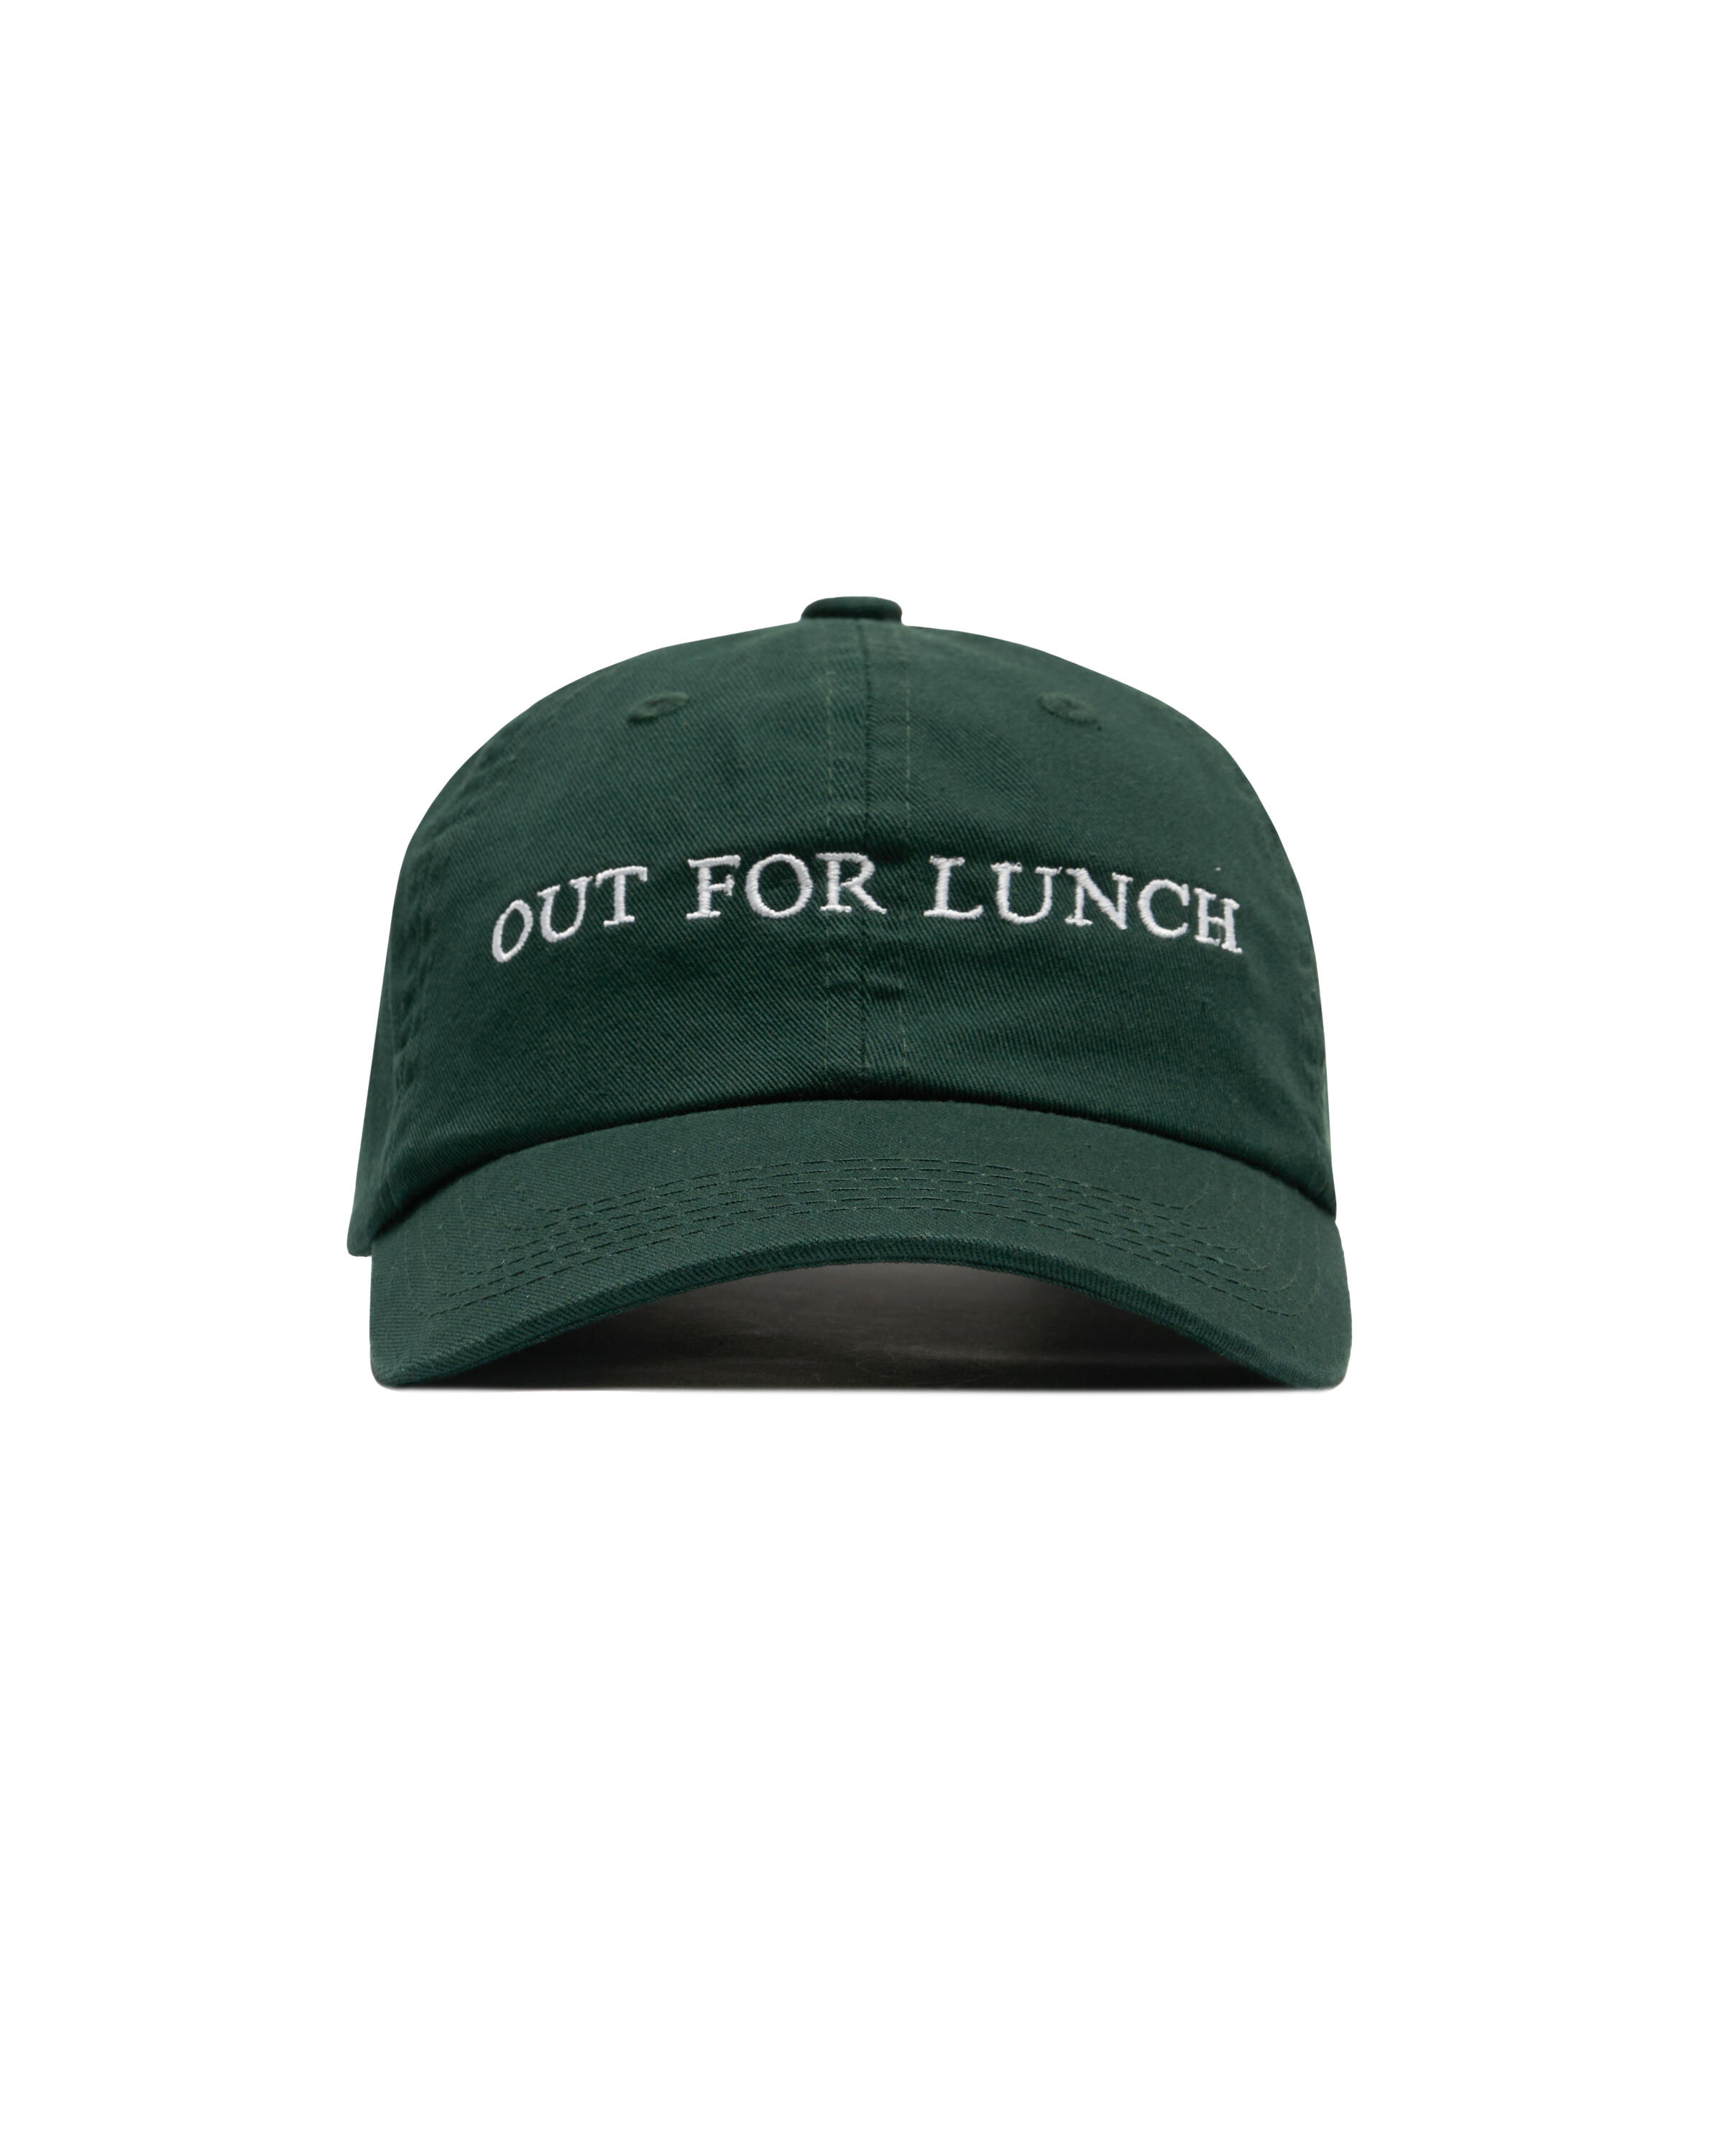 IDEA OUT FOR LUNCH HAT 